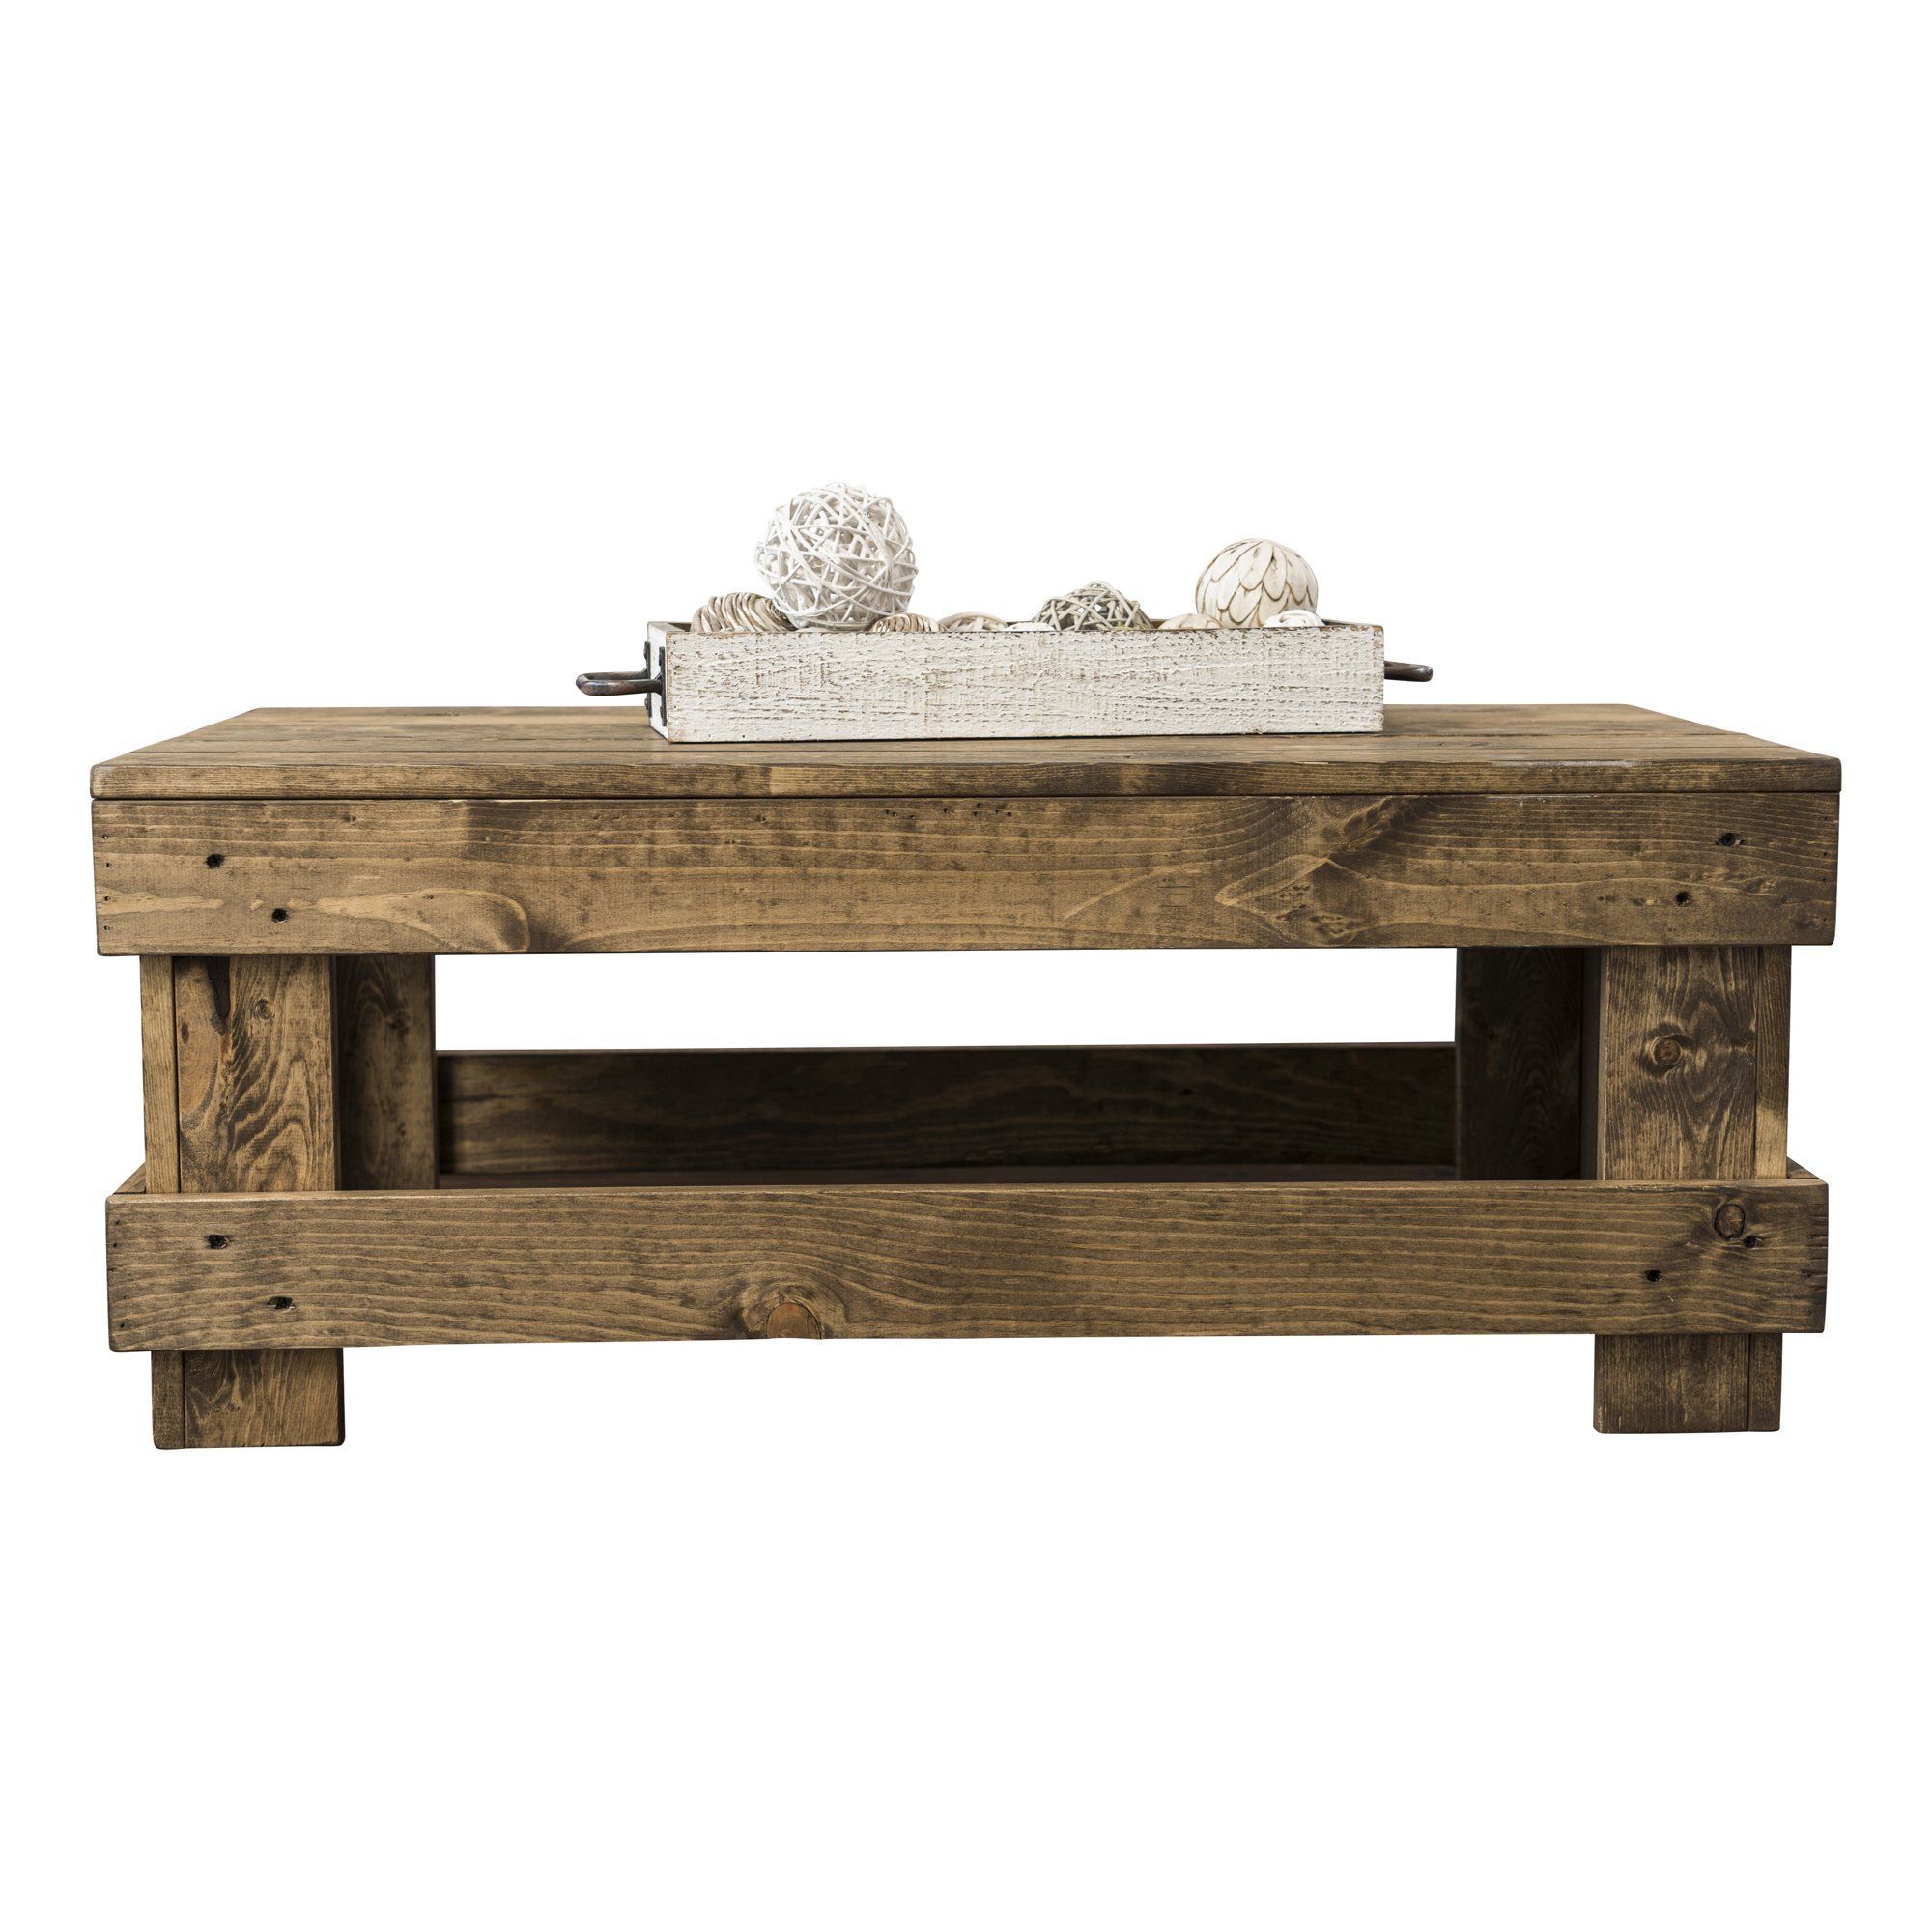 Woven Paths Landmark Pine Solid Wood Farmhouse Coffee Table, Dark With Woven Paths Coffee Tables (View 4 of 20)